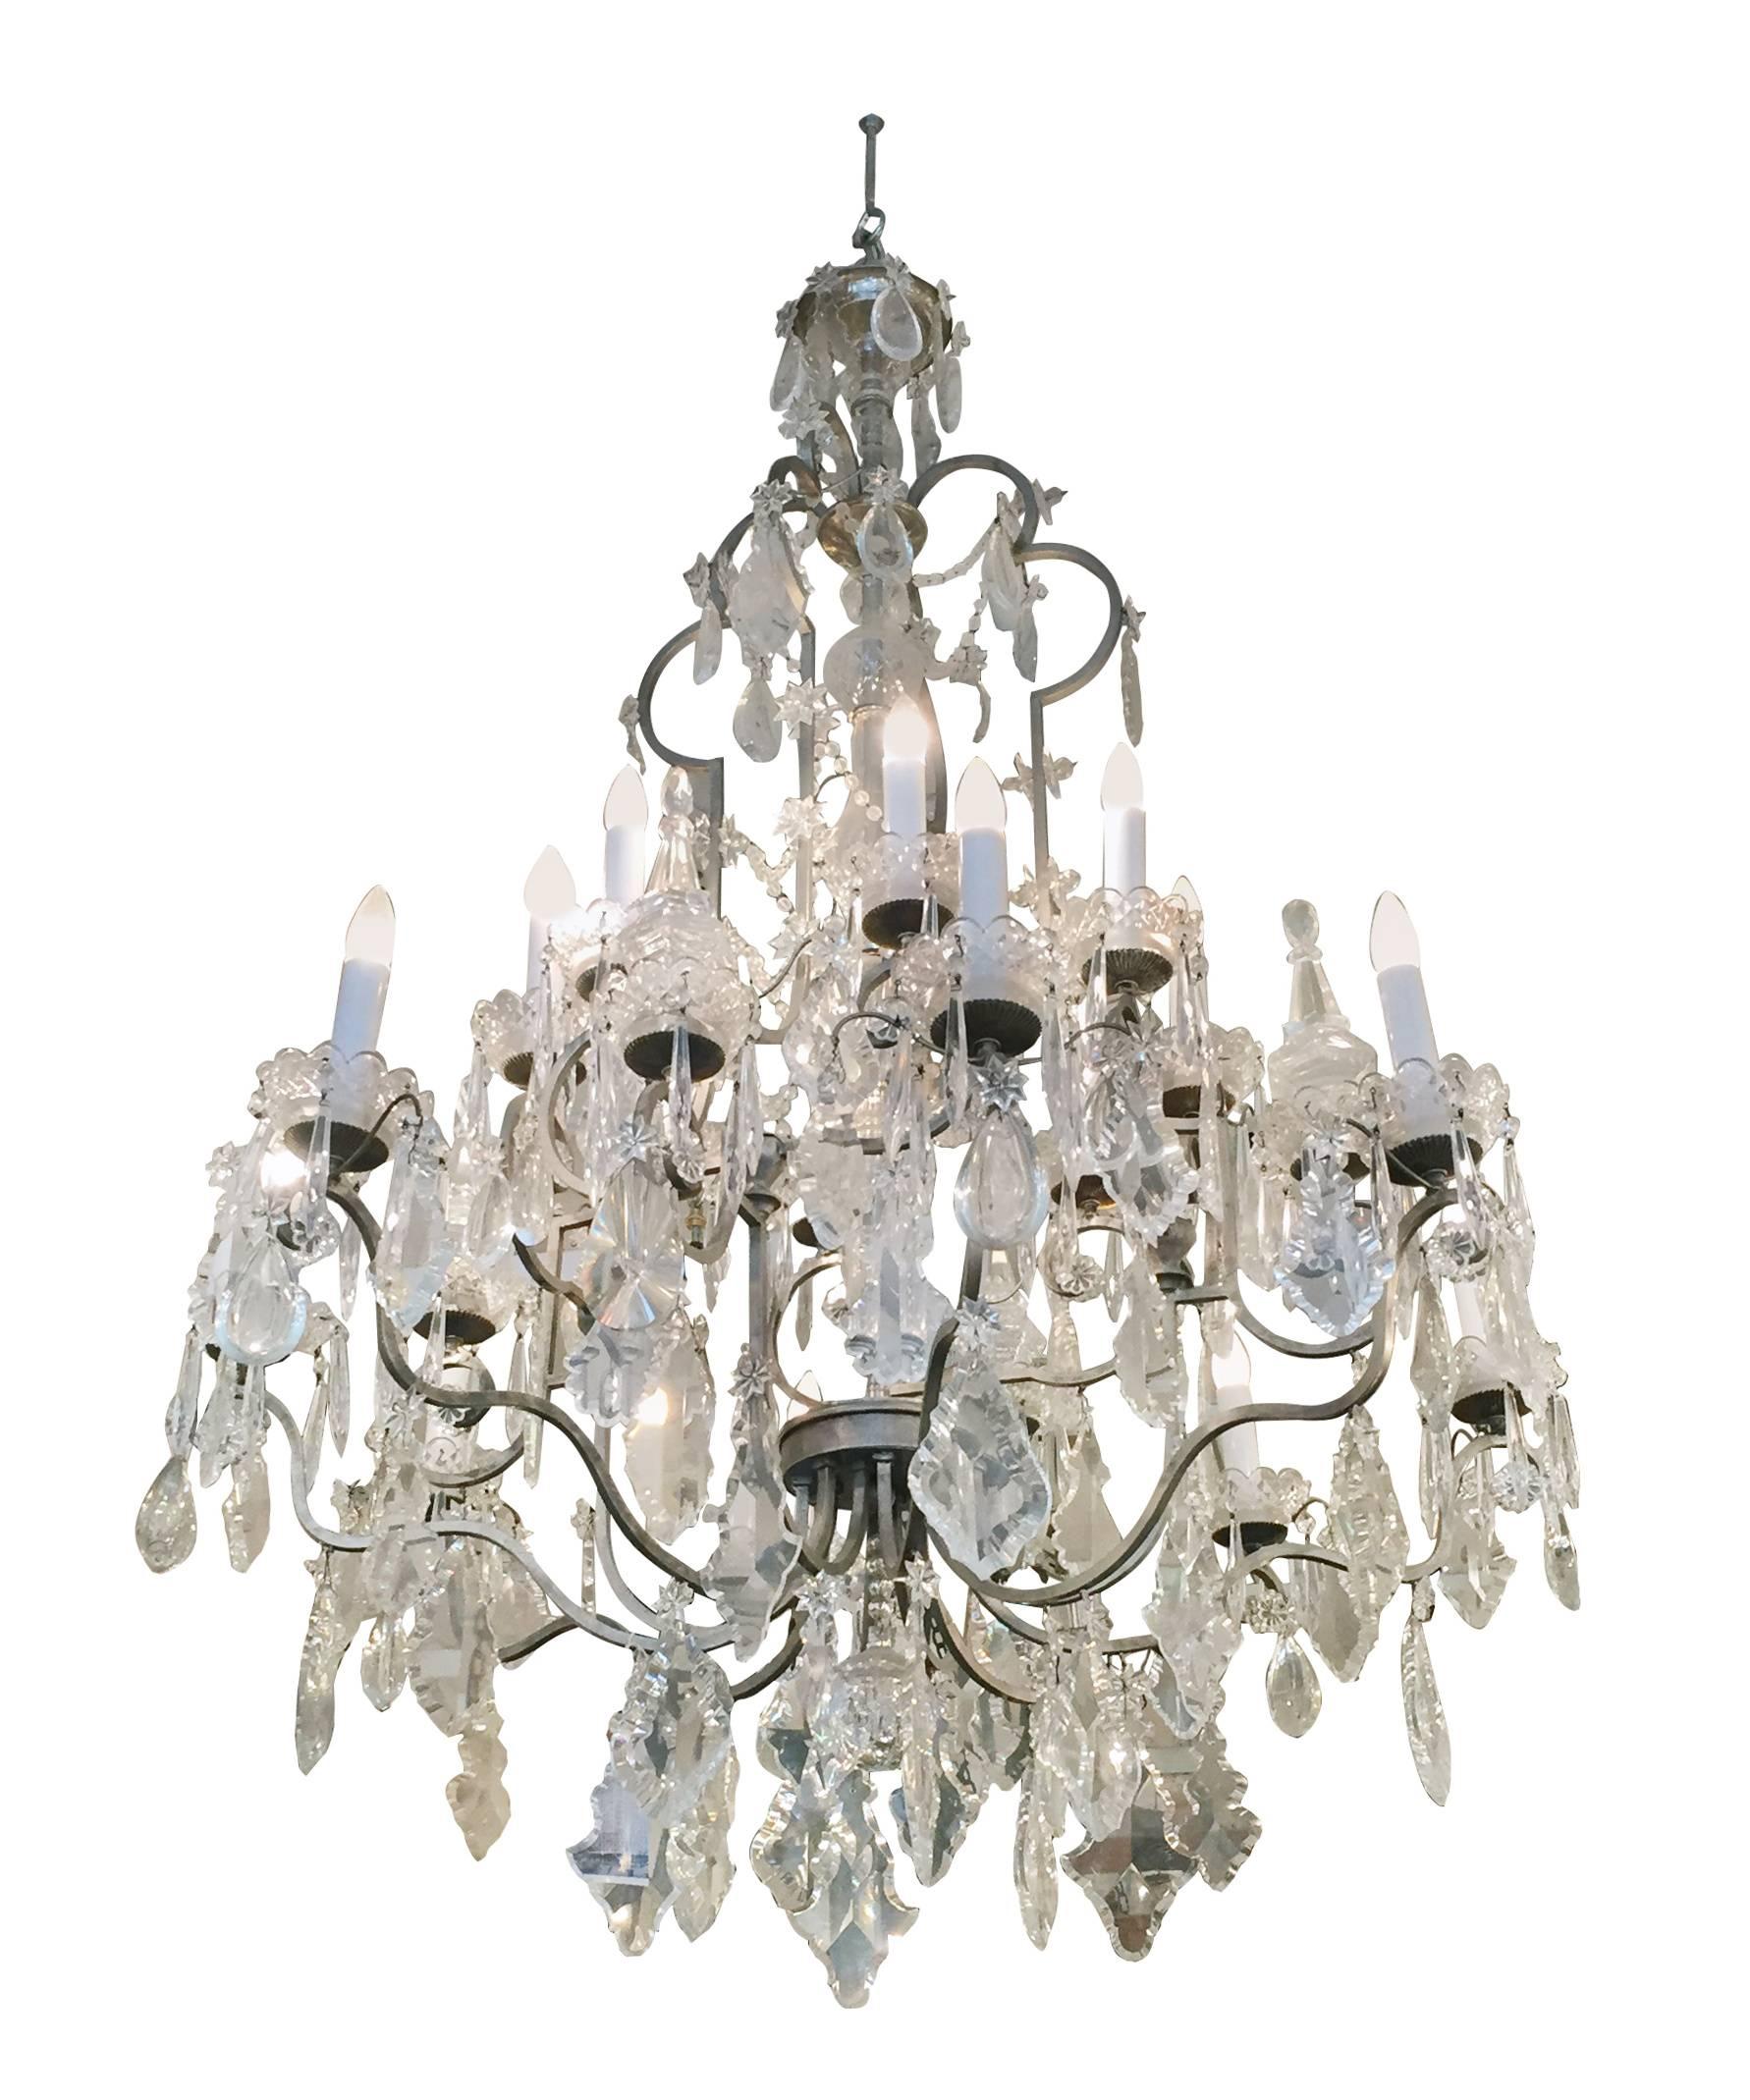 American Large Crystal Chandelier New York City Plaza Hotel 20 Lights For Sale